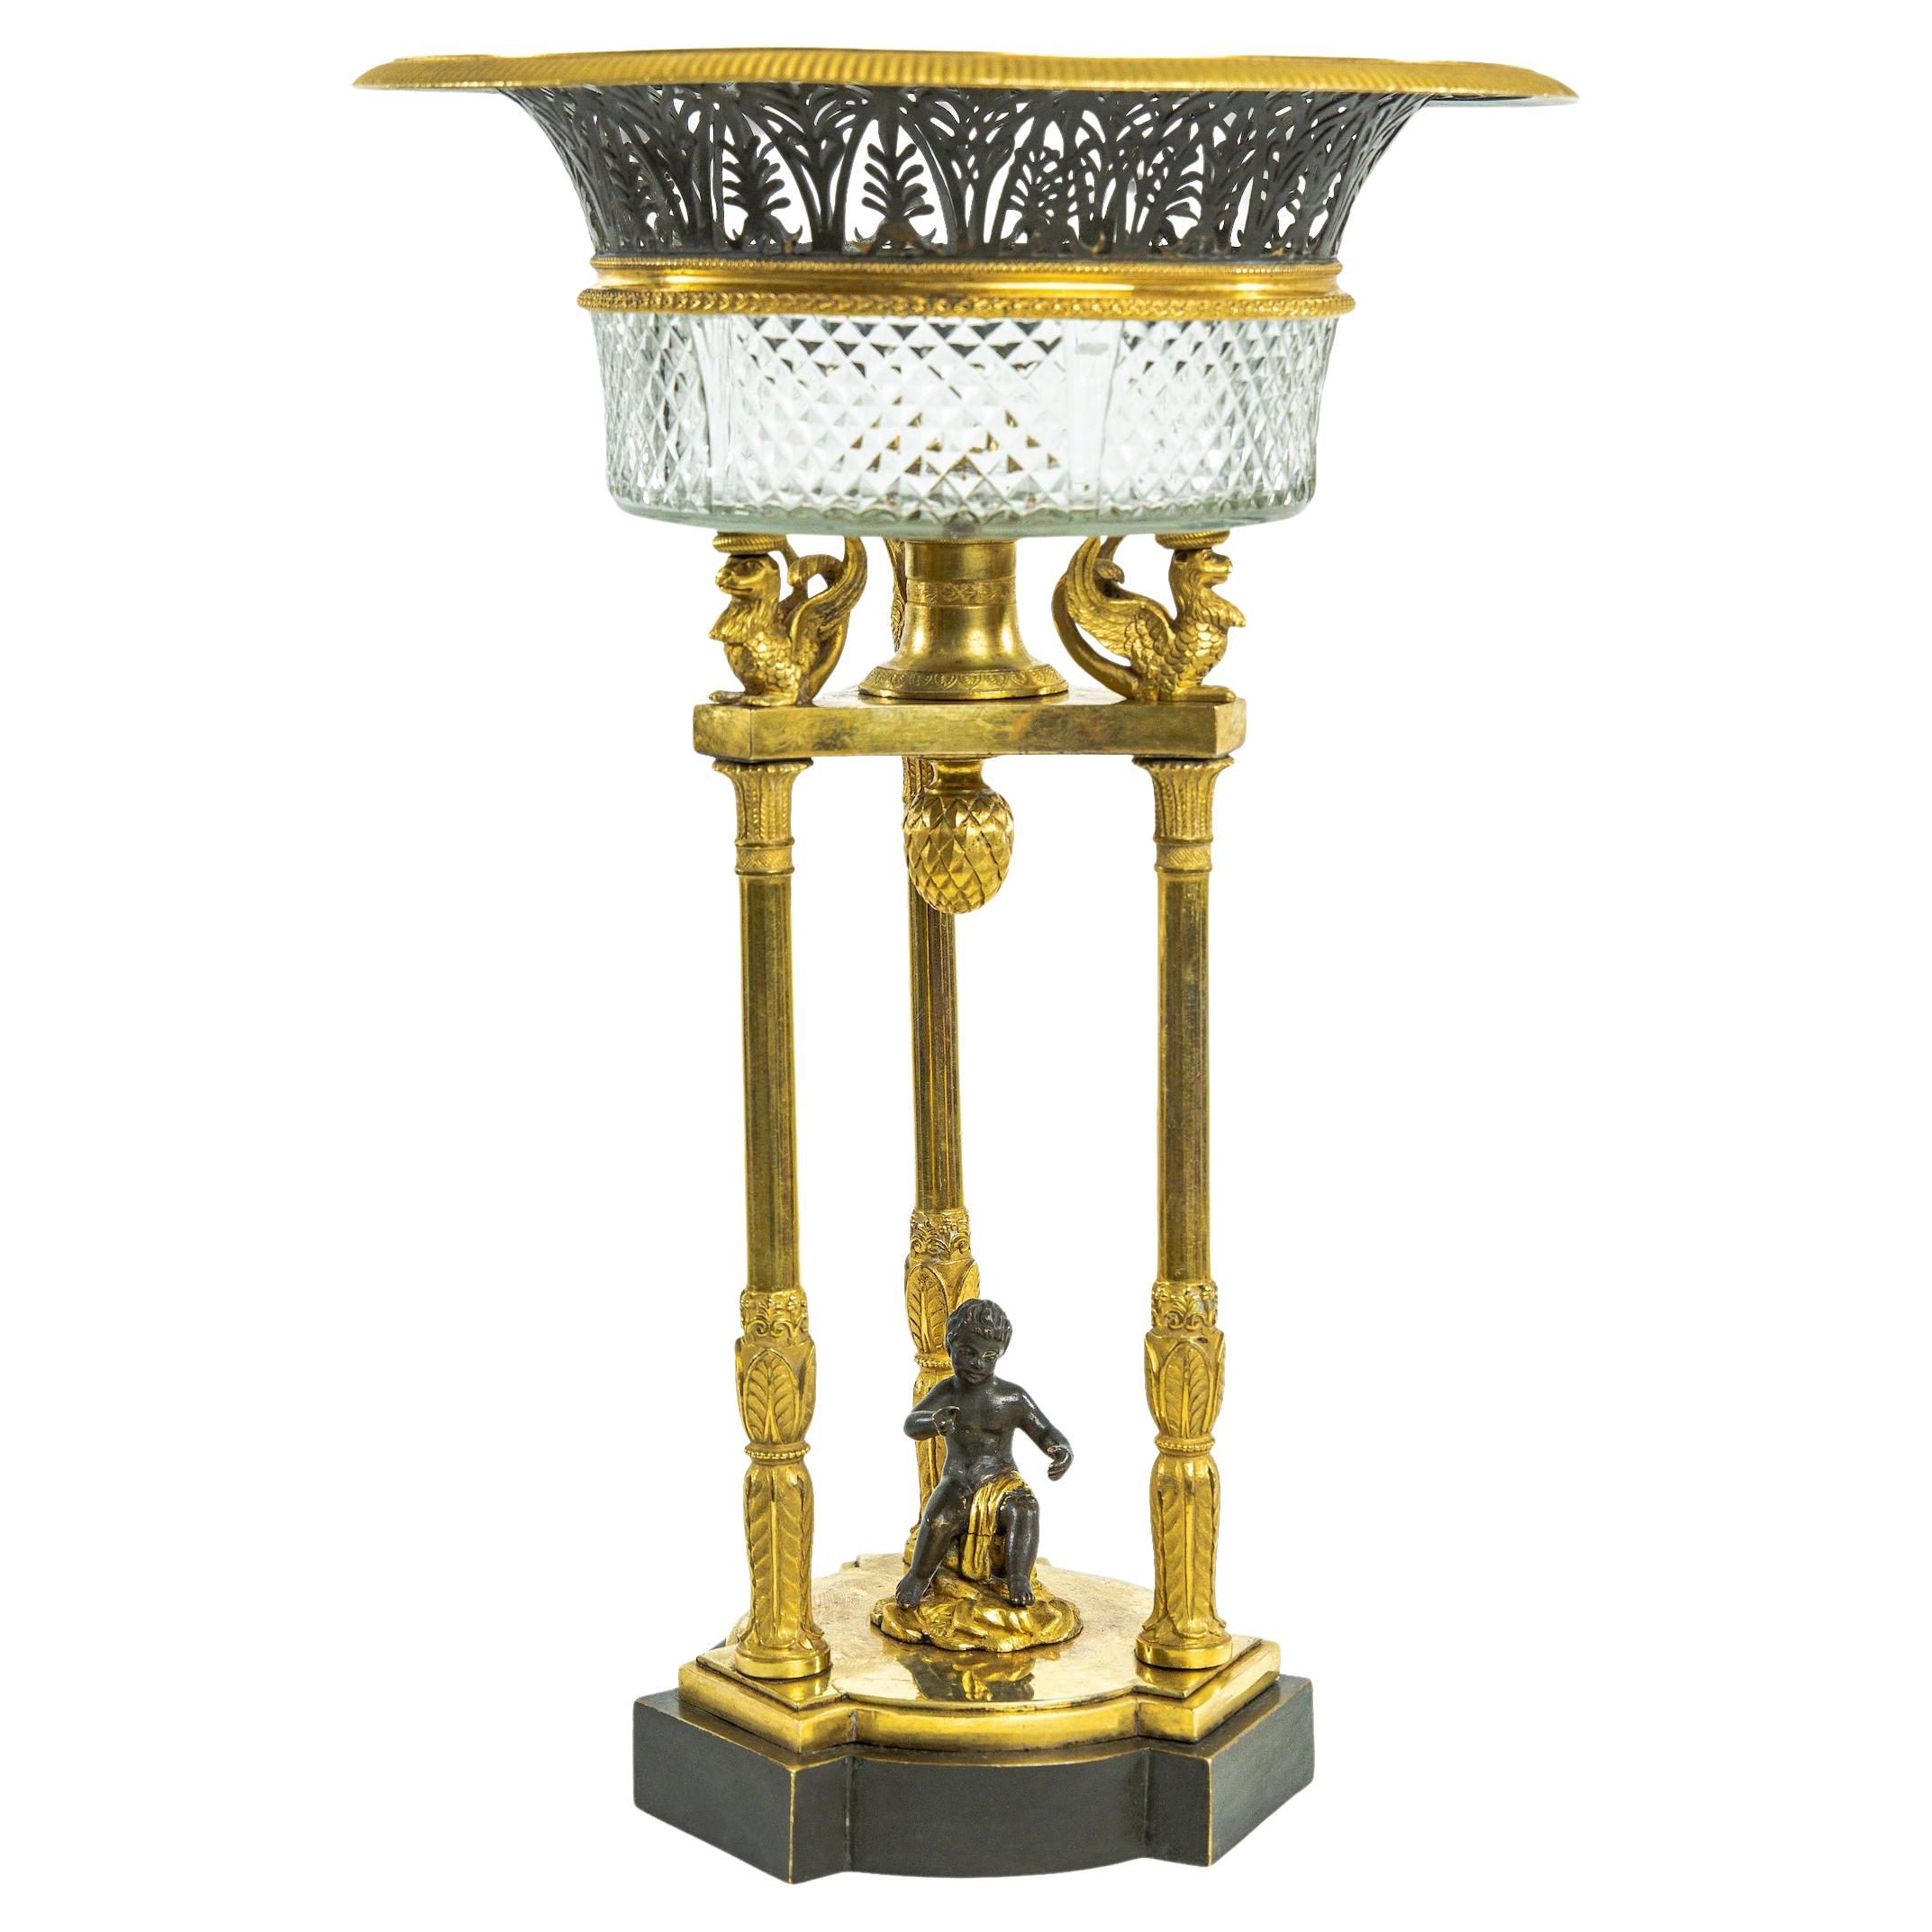 Empire Centerpiece with Putto Decor, Bronze and Glass, Early 19th Century For Sale